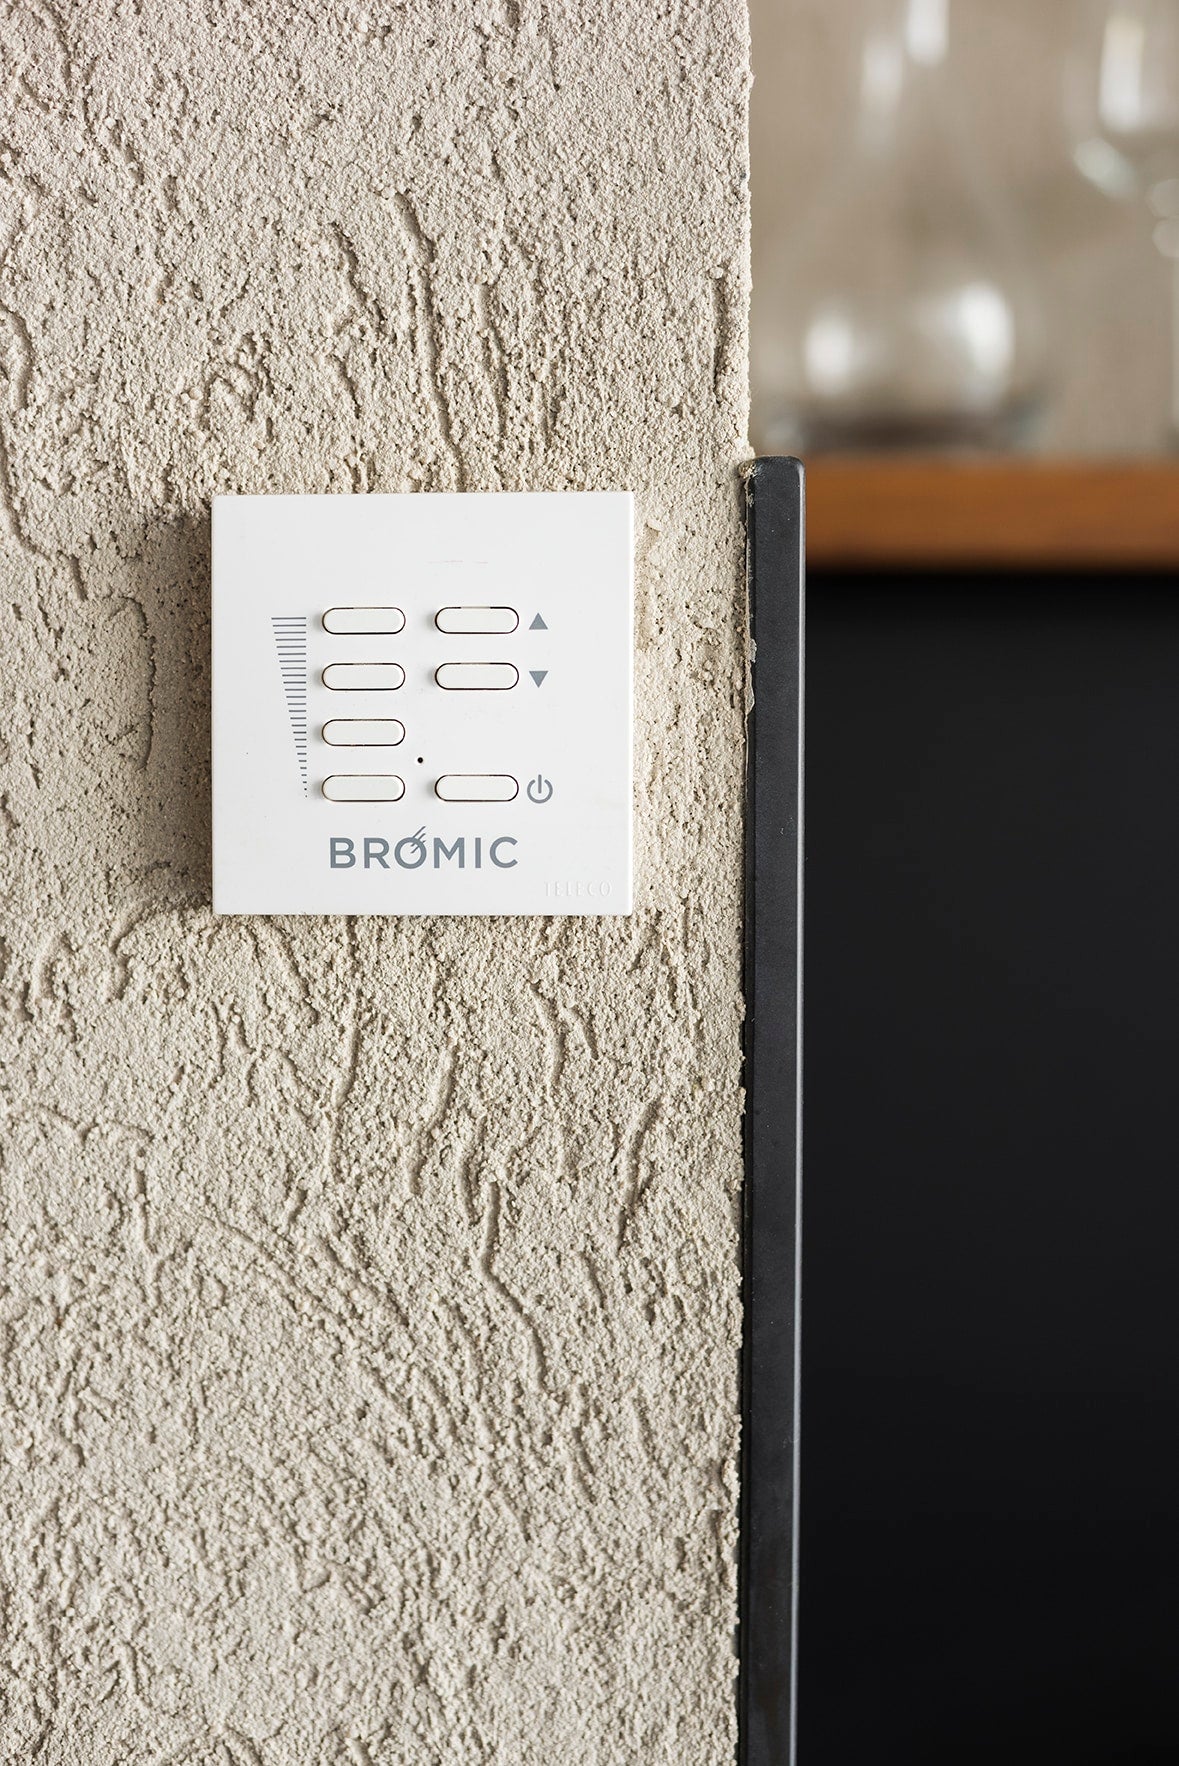 Bromic Dimmer Controller for Electric Heaters